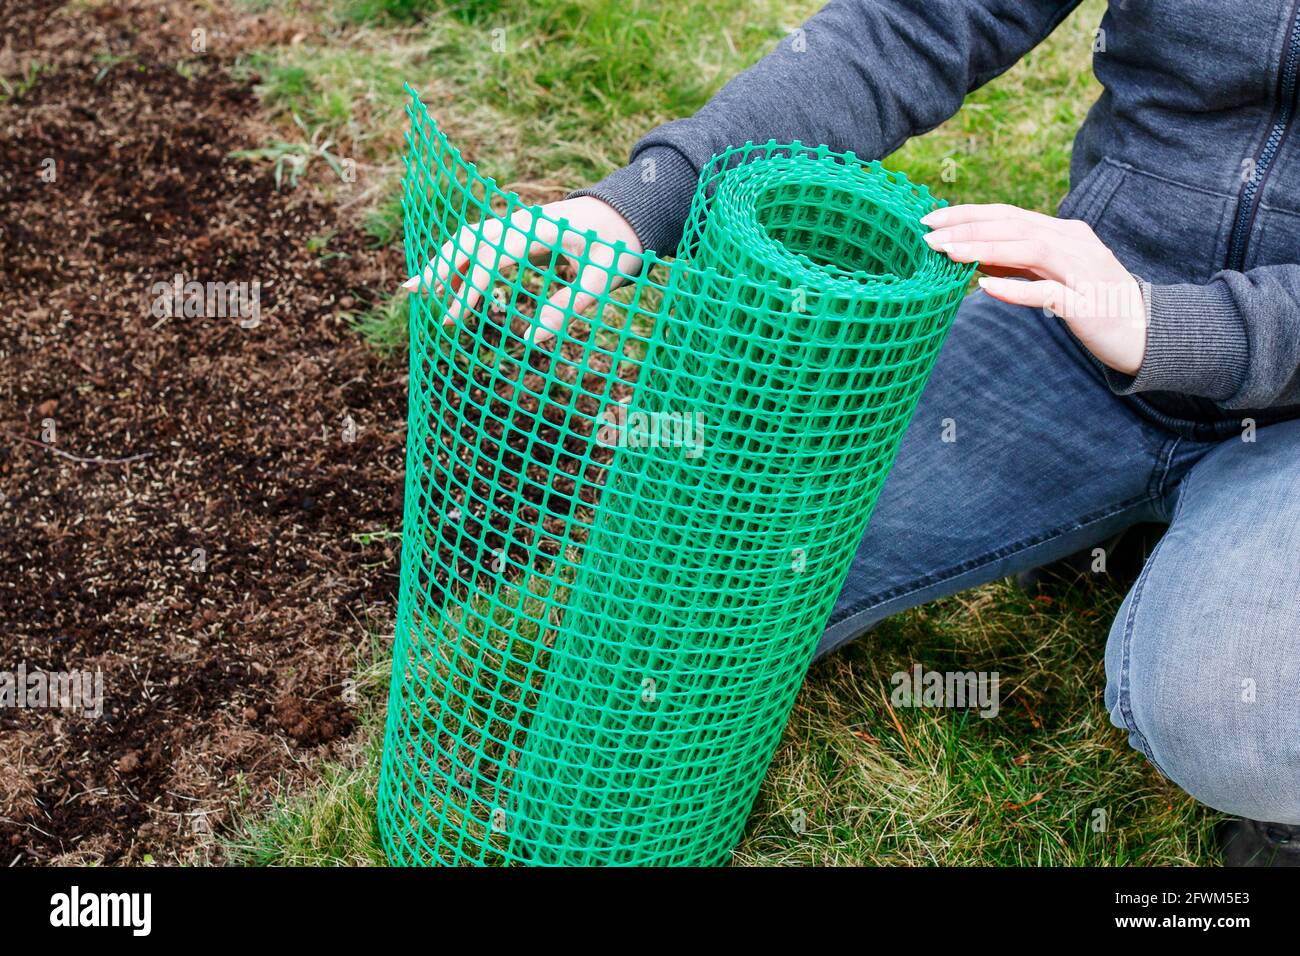 A woman holds a plastic net that is useful in gardening. Garden hobby Stock Photo